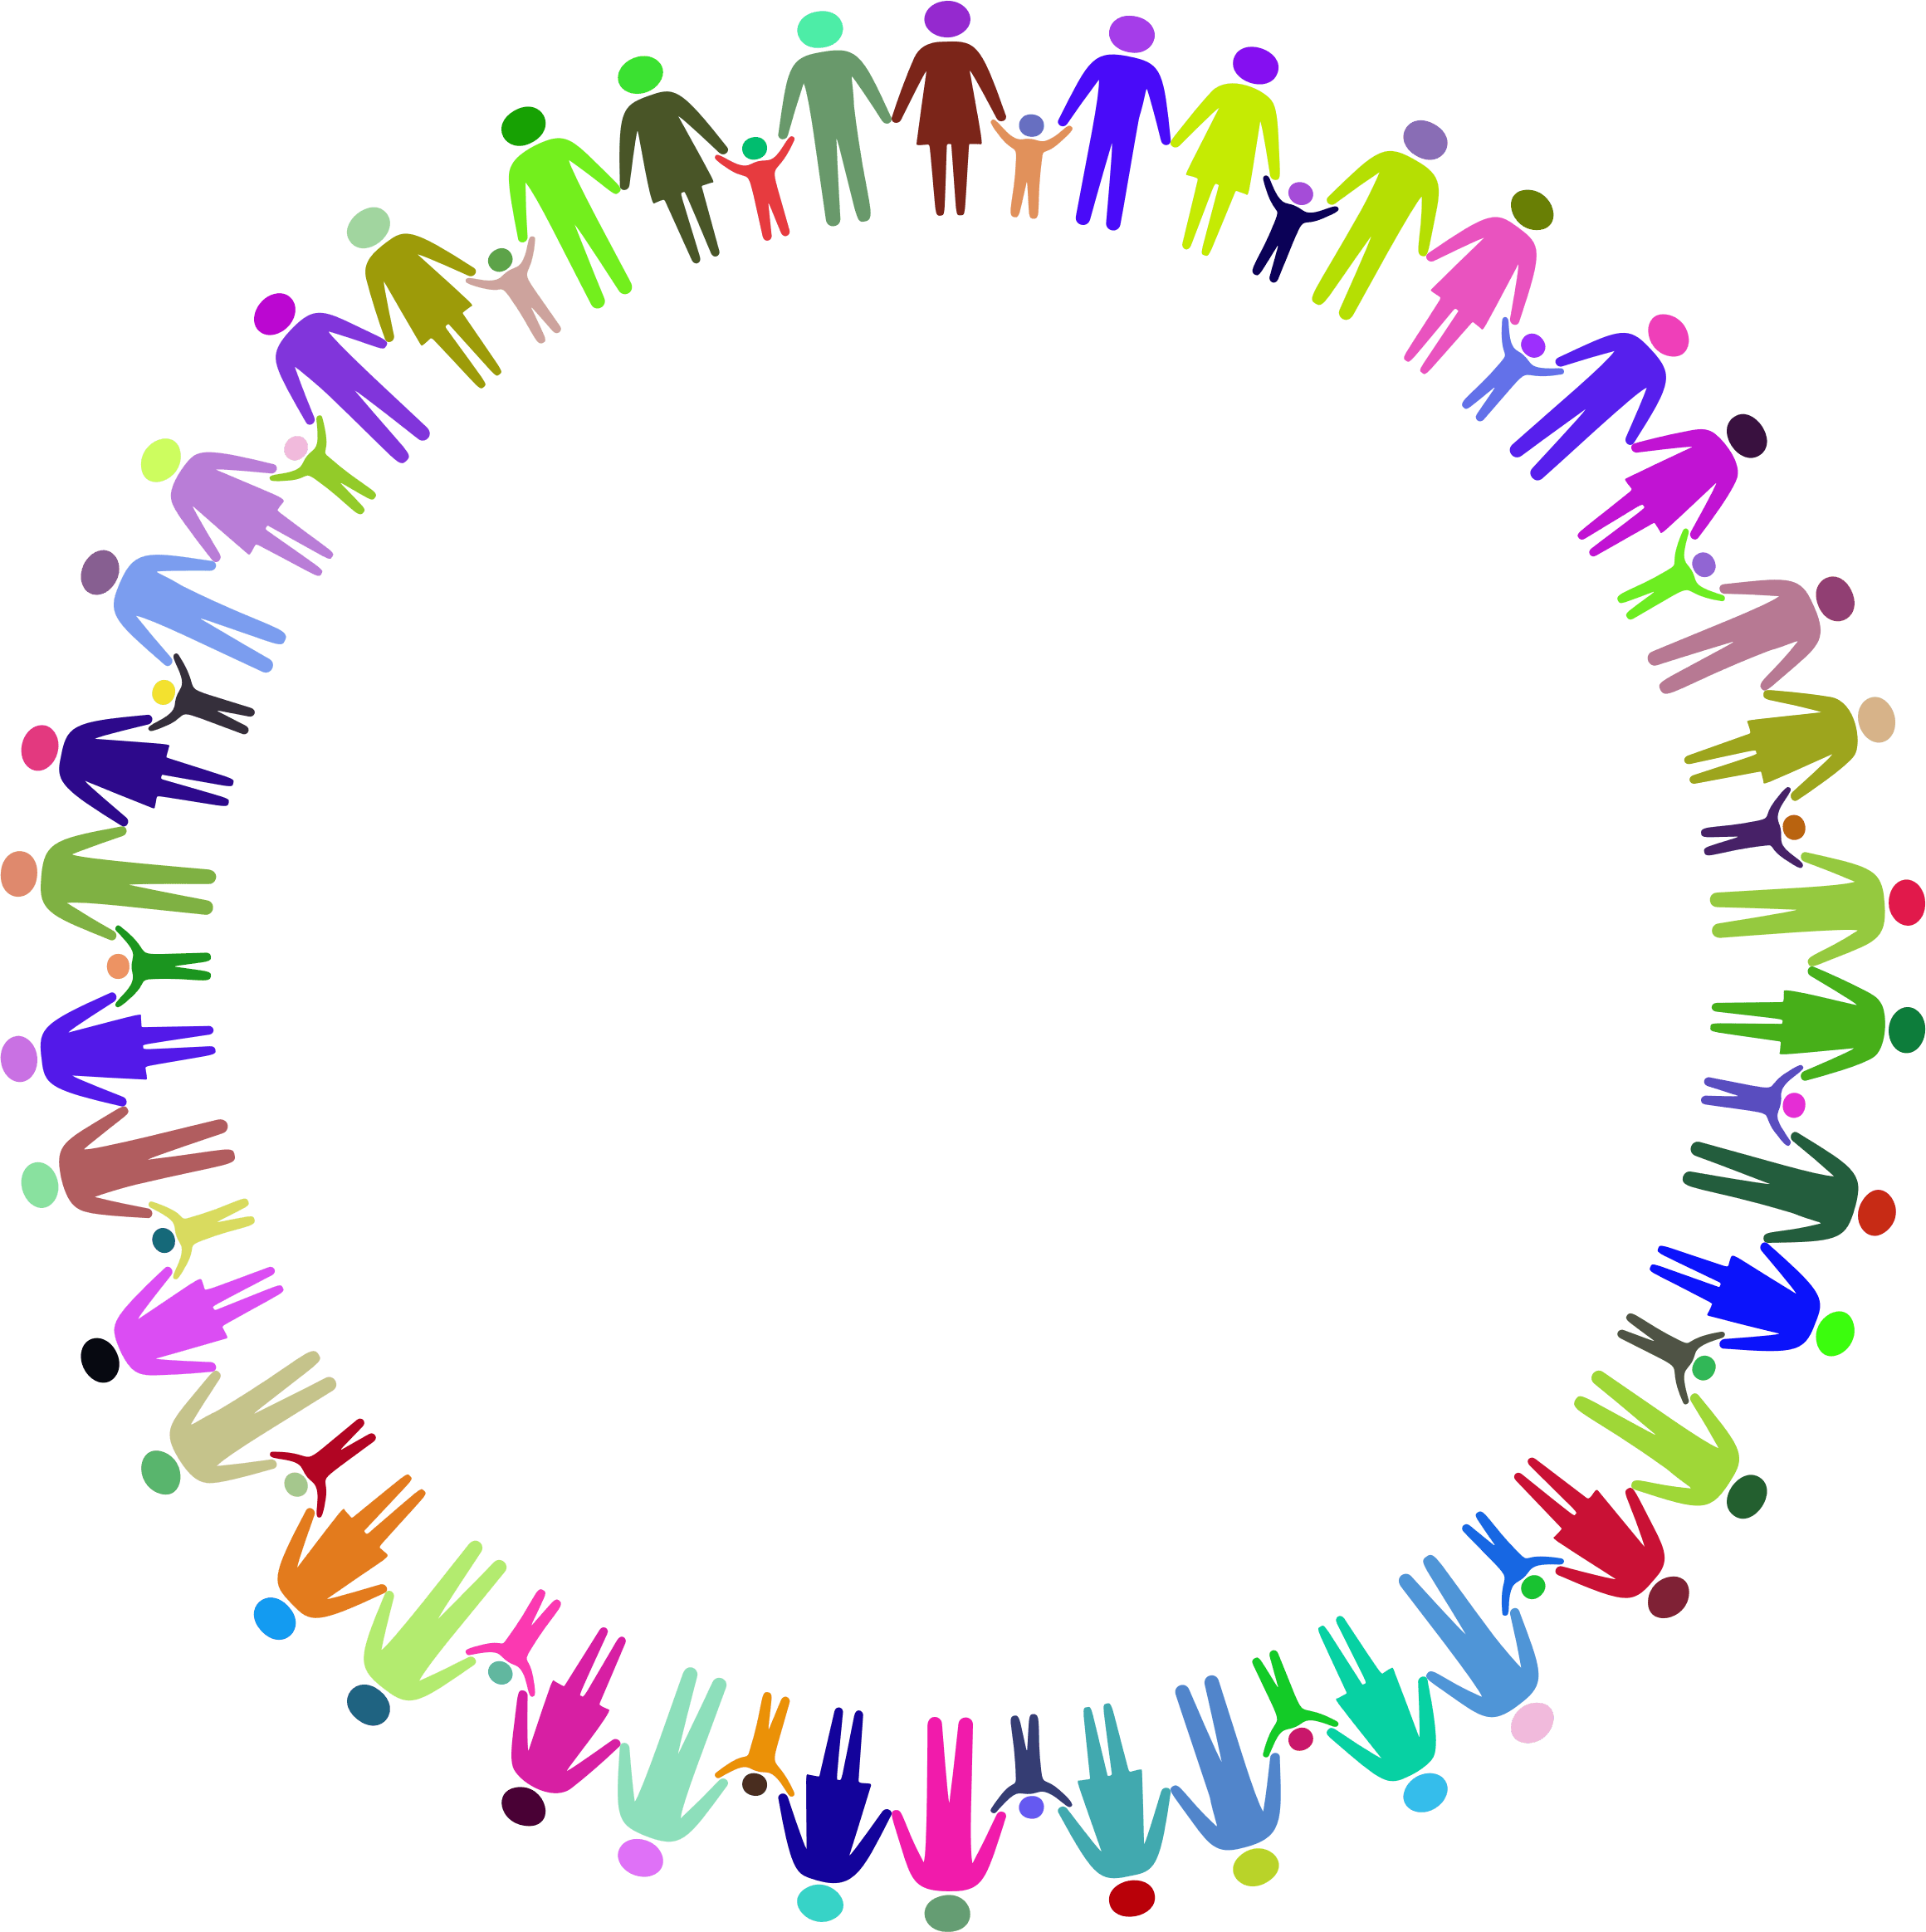 Circle of Hands Logo - PNG Circle Of Hands Transparent Circle Of Hands.PNG Images. | PlusPNG